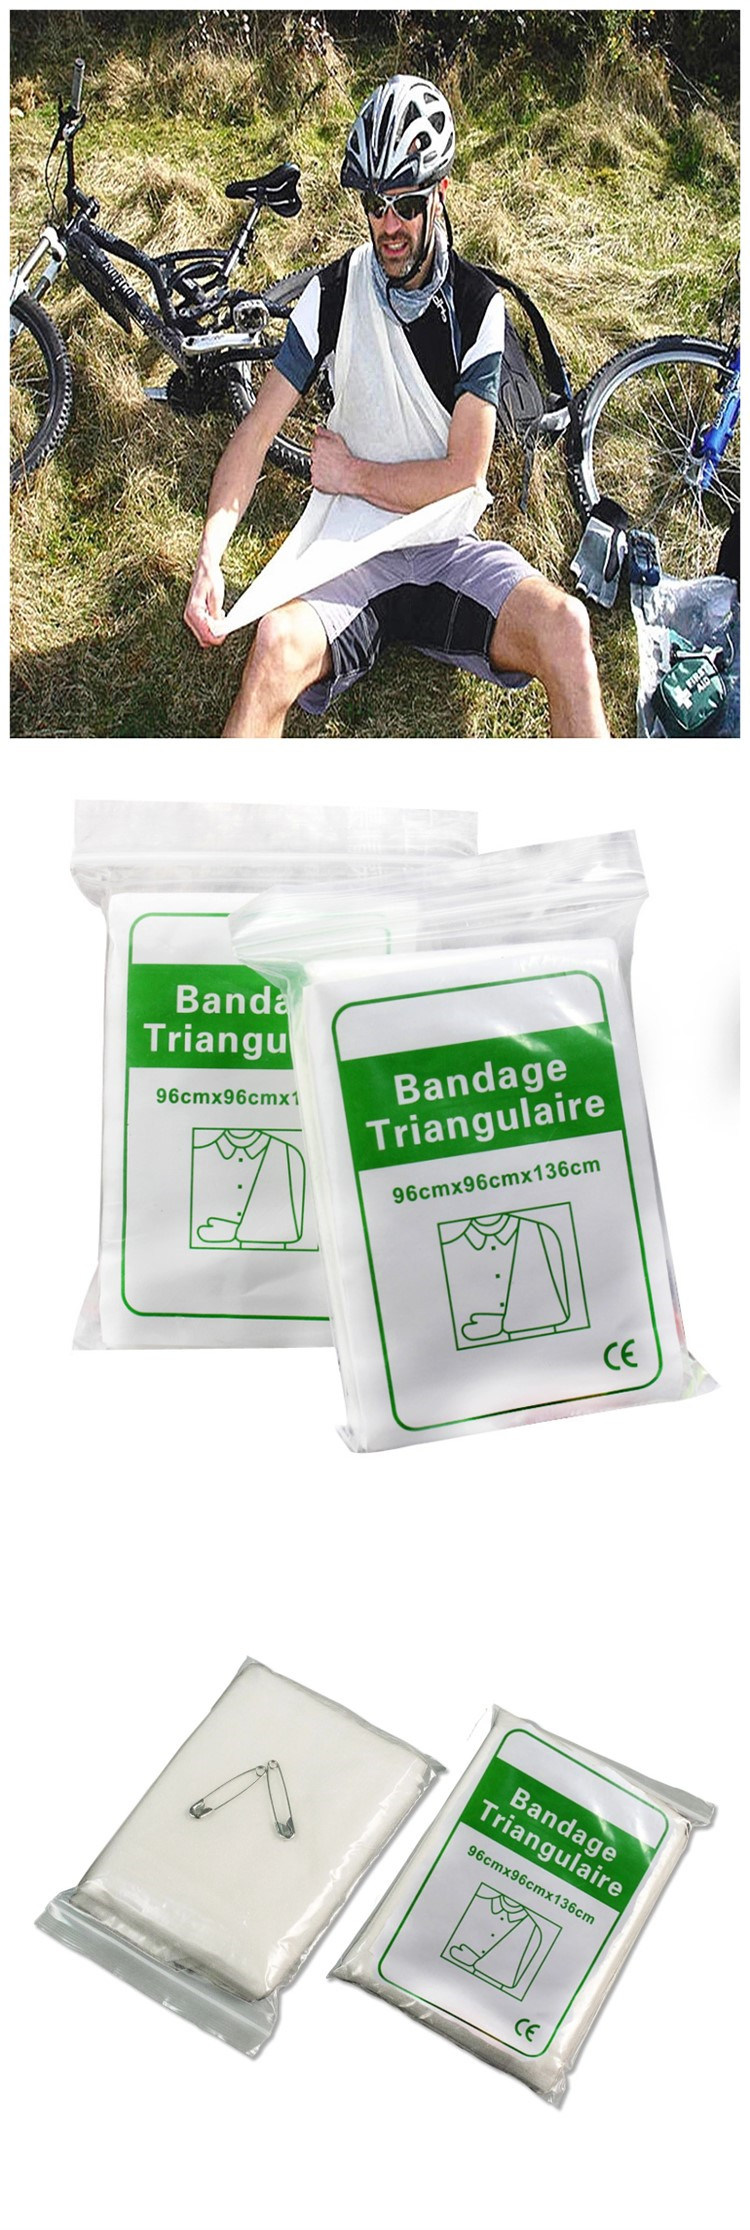 Medical First Aid Disposable Breathable Cotton Non-Woven Triangular Bandage